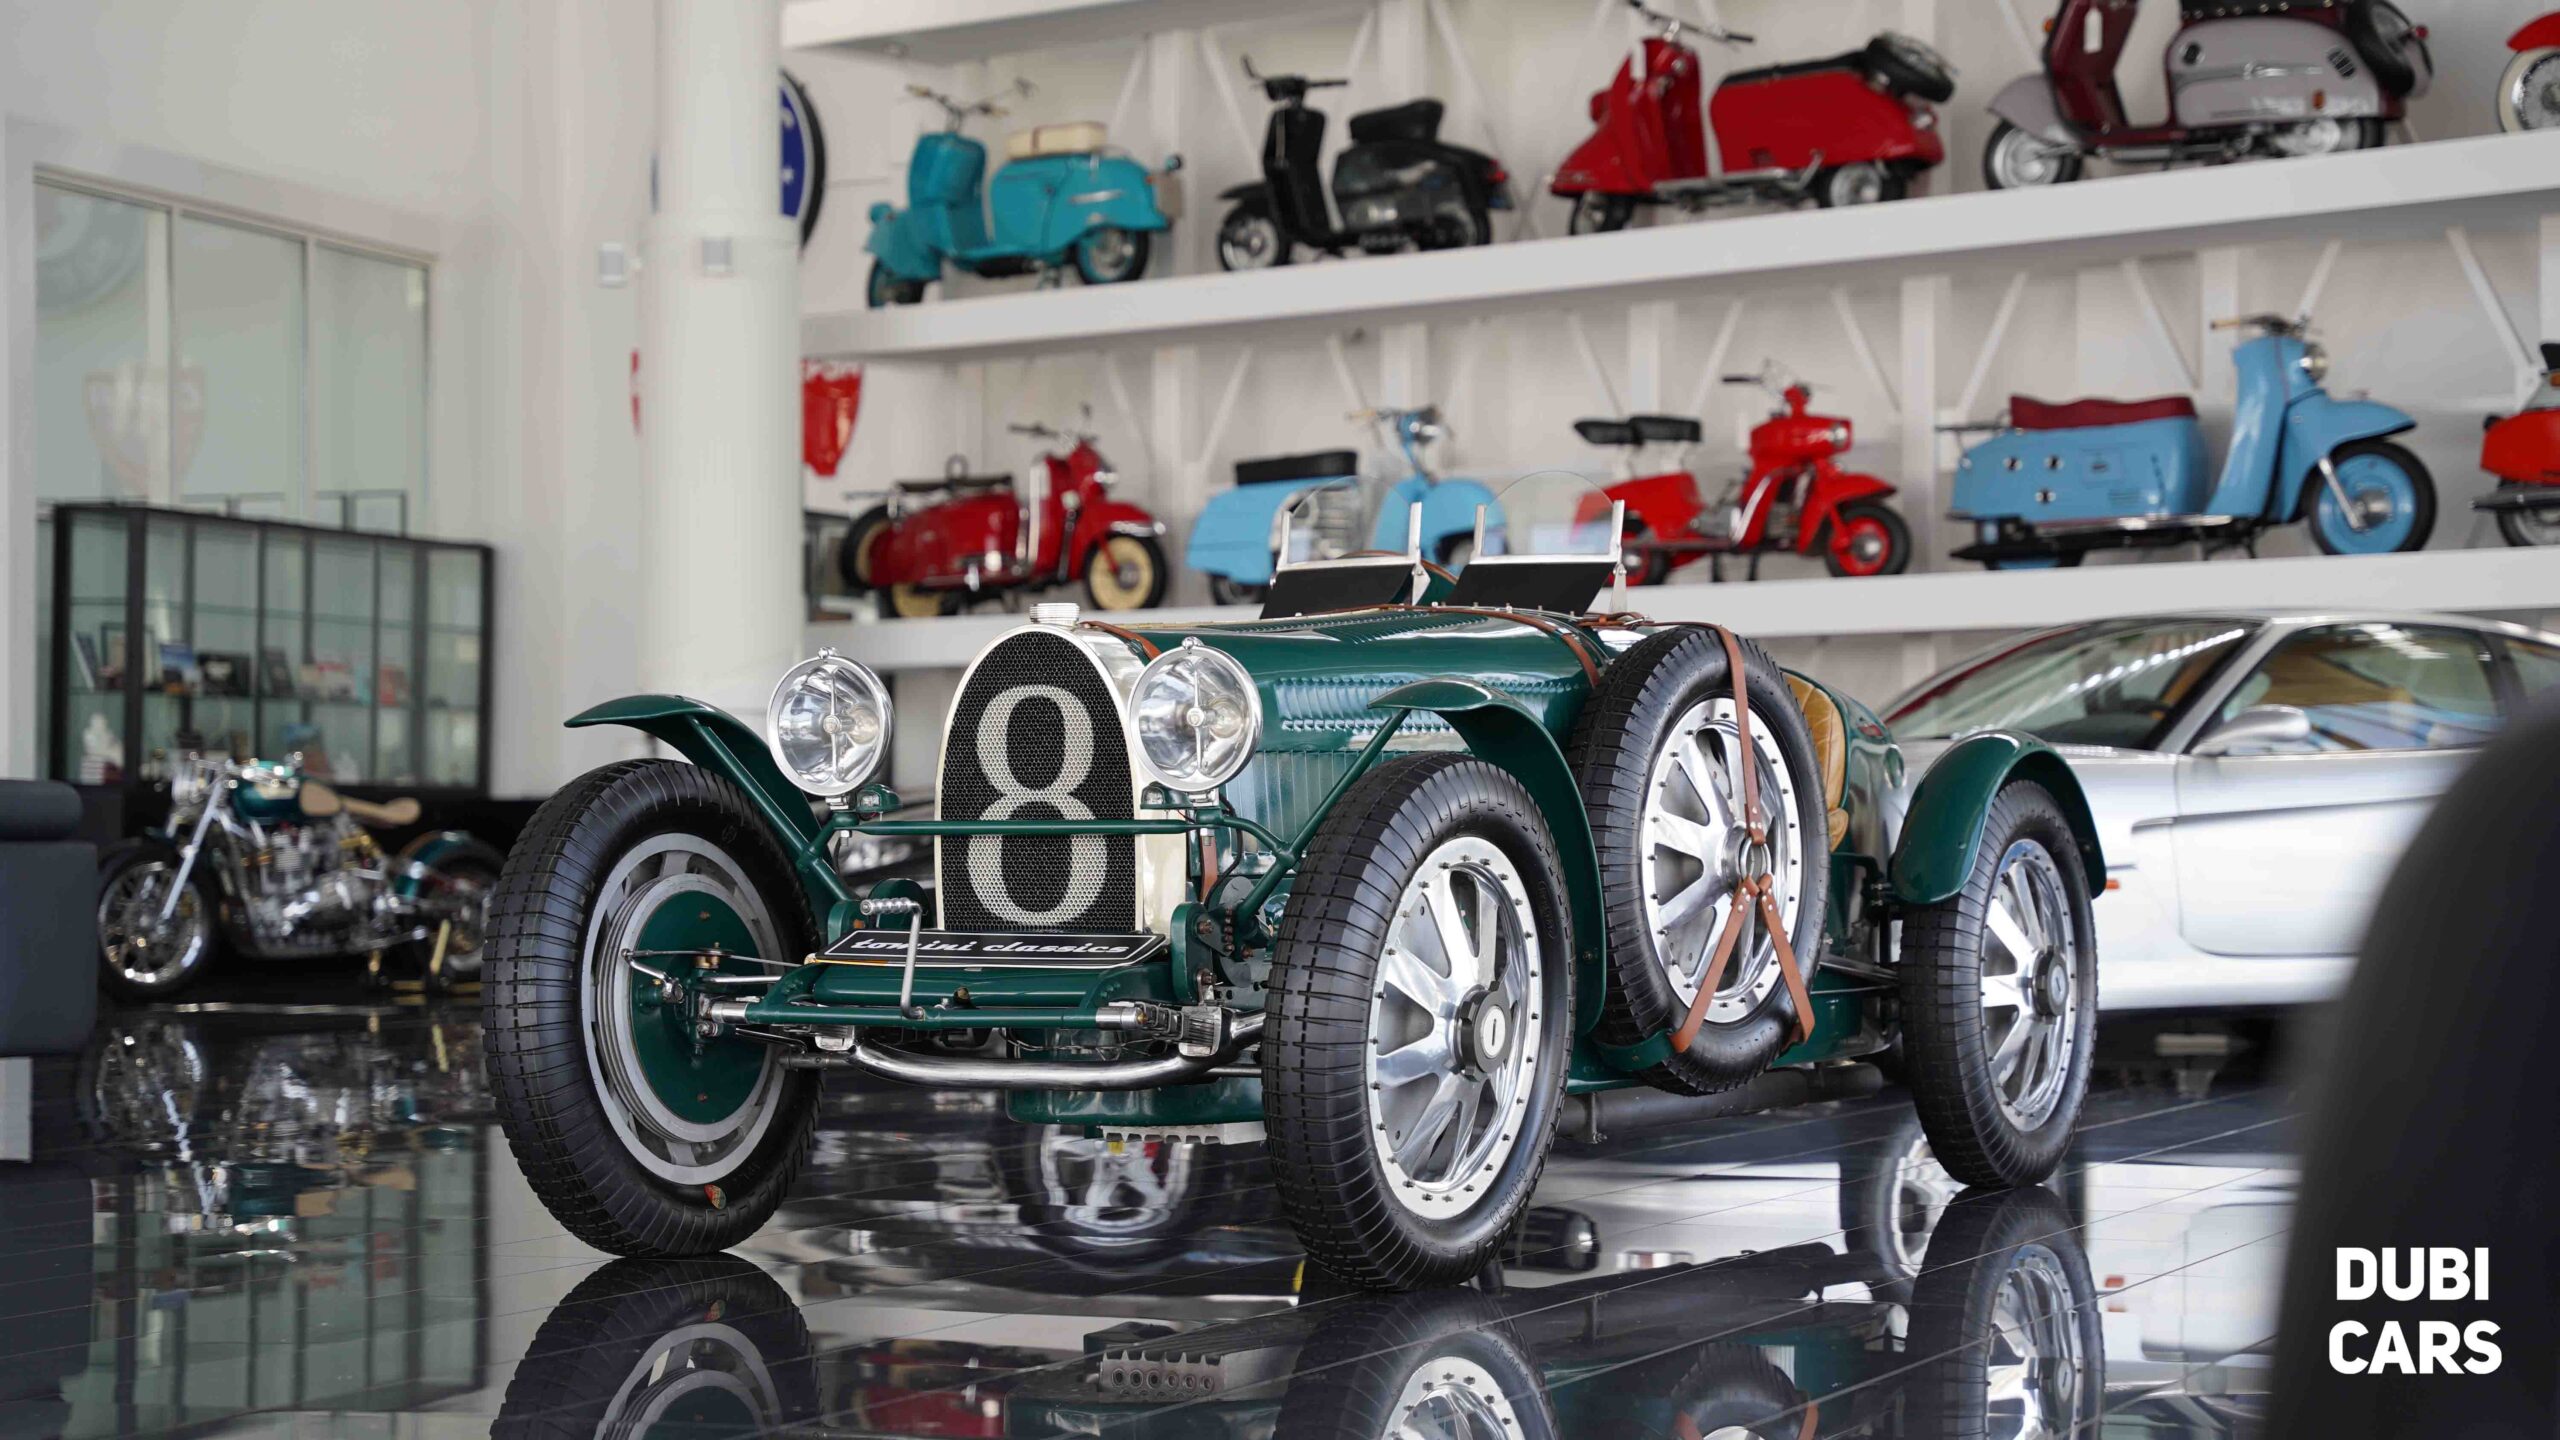 Revisiting History: The Exquisite 1927 Bugatti Type 35 B Pur Sang — Classic Cars On DubiCars